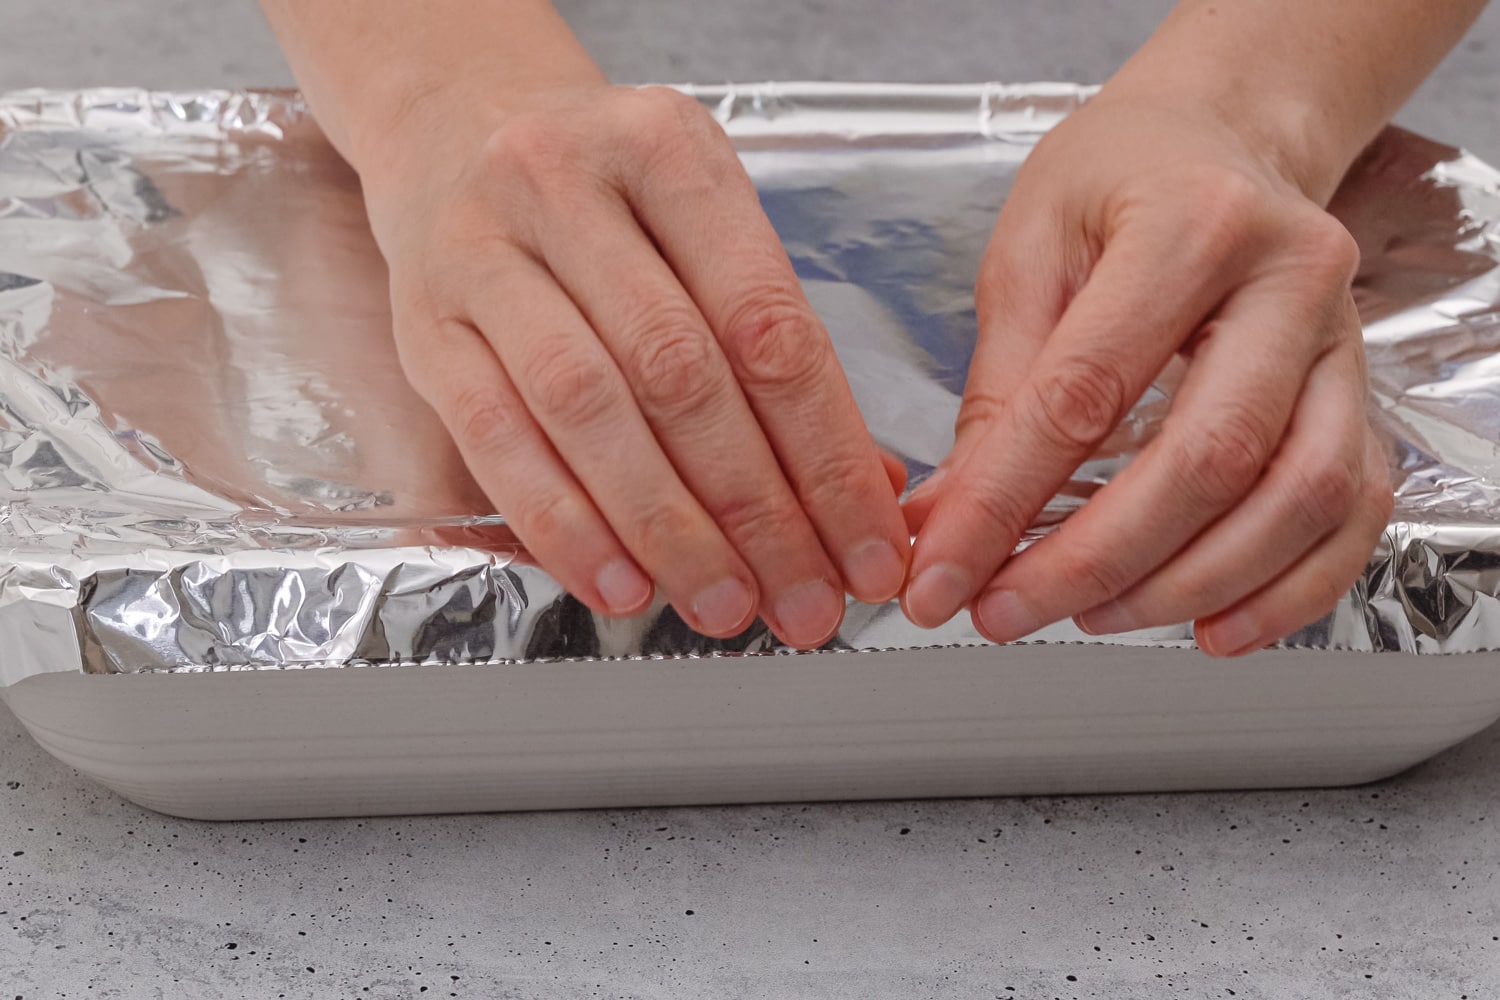 Baking dish covered with aluminum foil close up on the table, front view, woman hands. Spinach lasagna recipe. Before baking cover lasagna with aluminum foil.